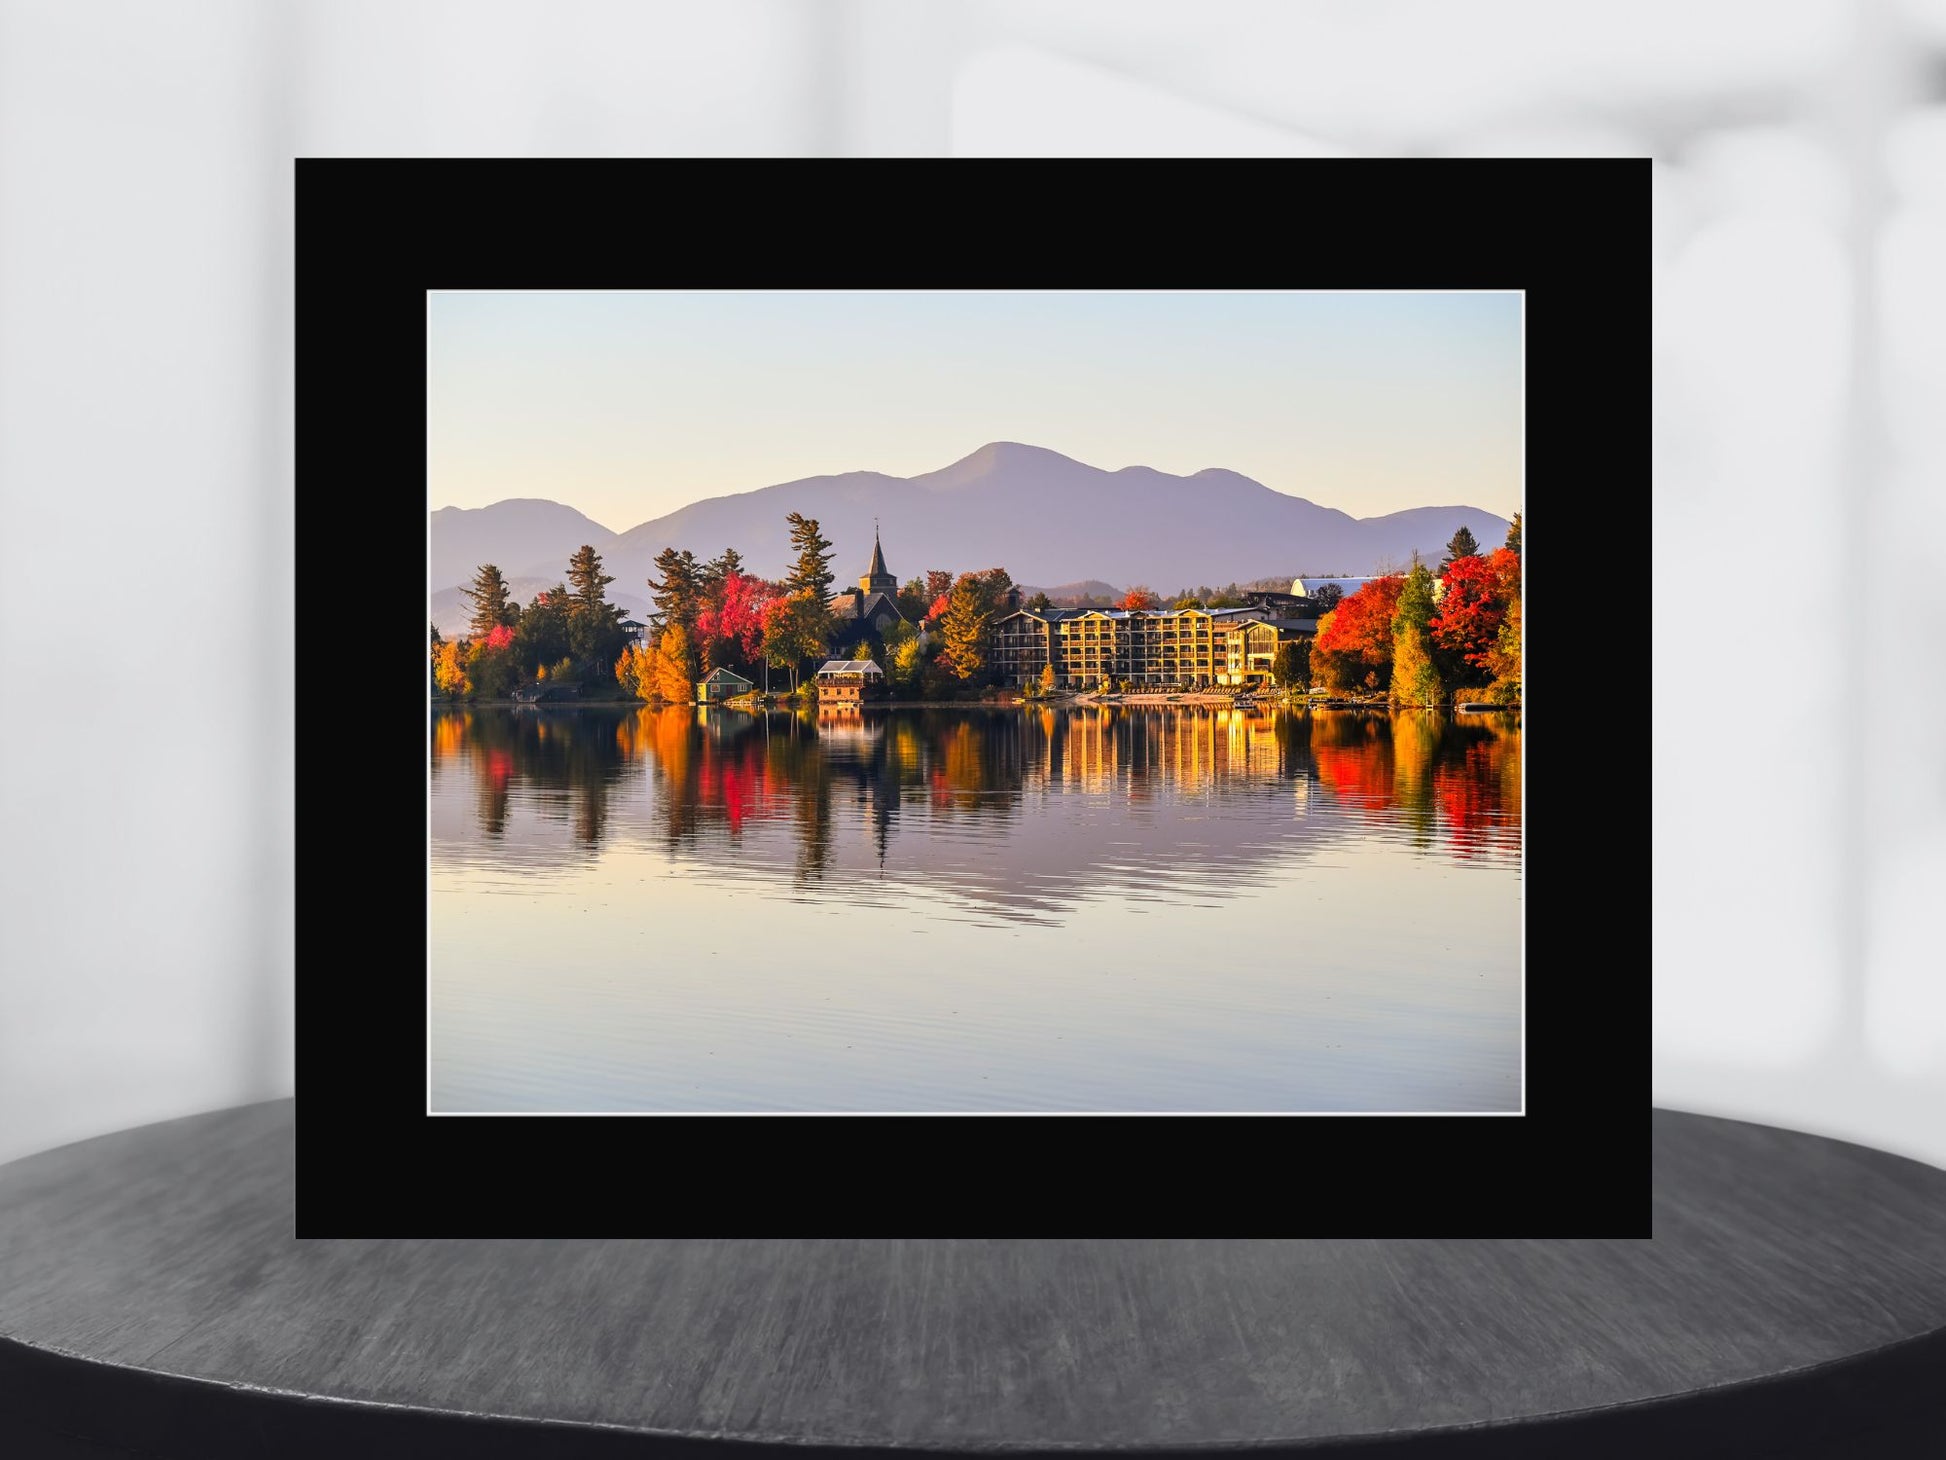 Experience the breathtaking beauty of autumn with Reflecting Autumn's Beauty - Mirror Lake wall art